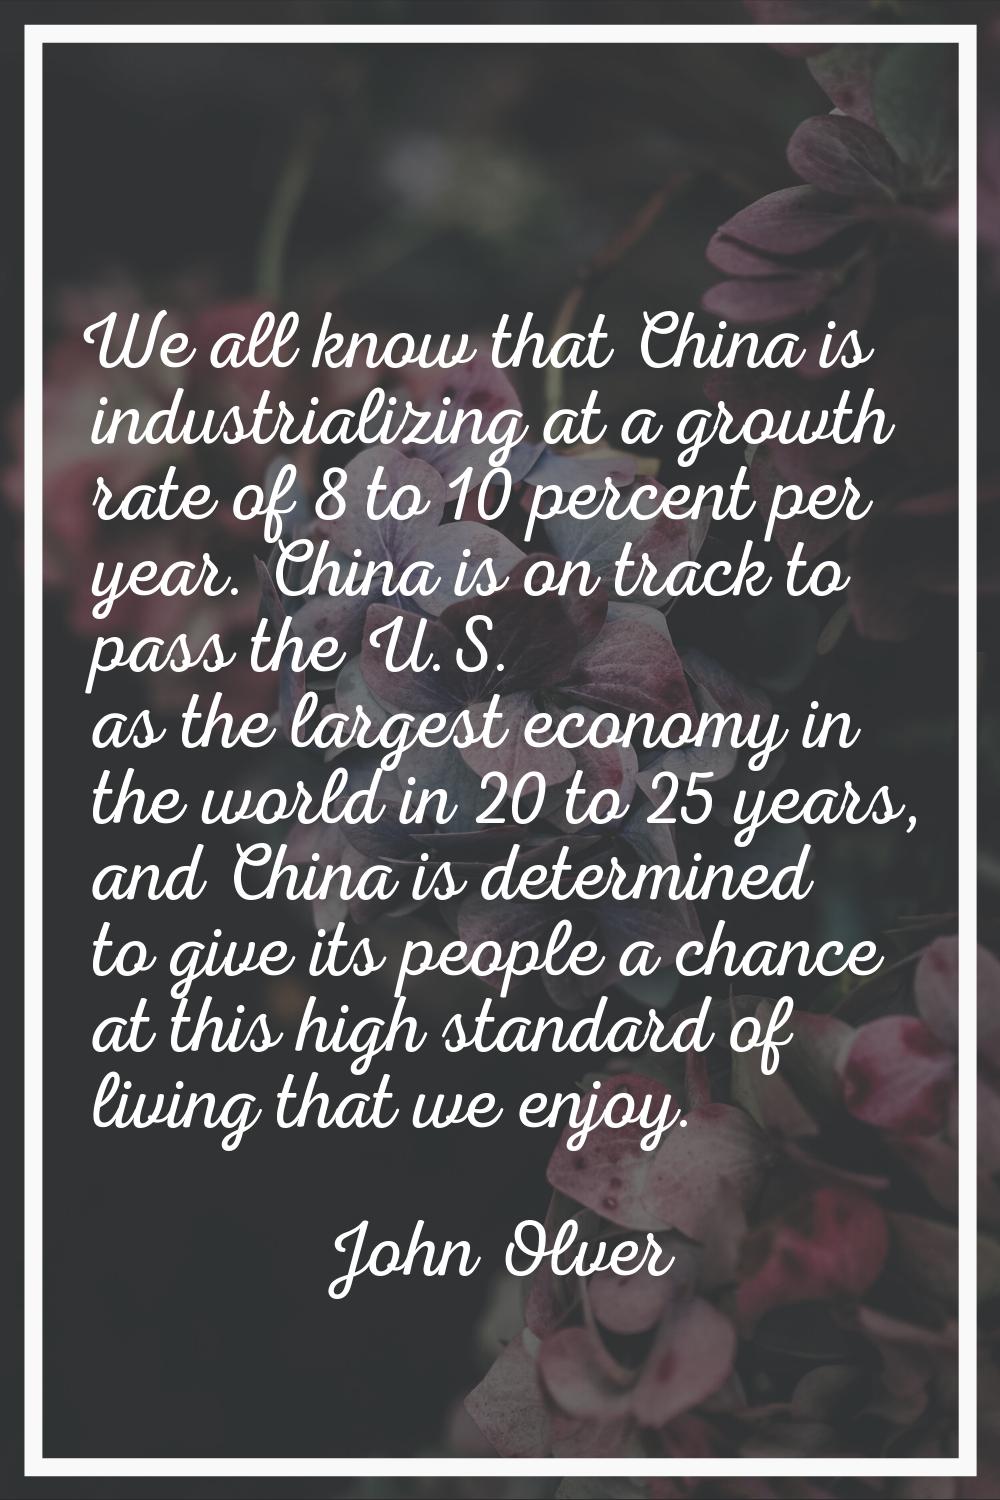 We all know that China is industrializing at a growth rate of 8 to 10 percent per year. China is on